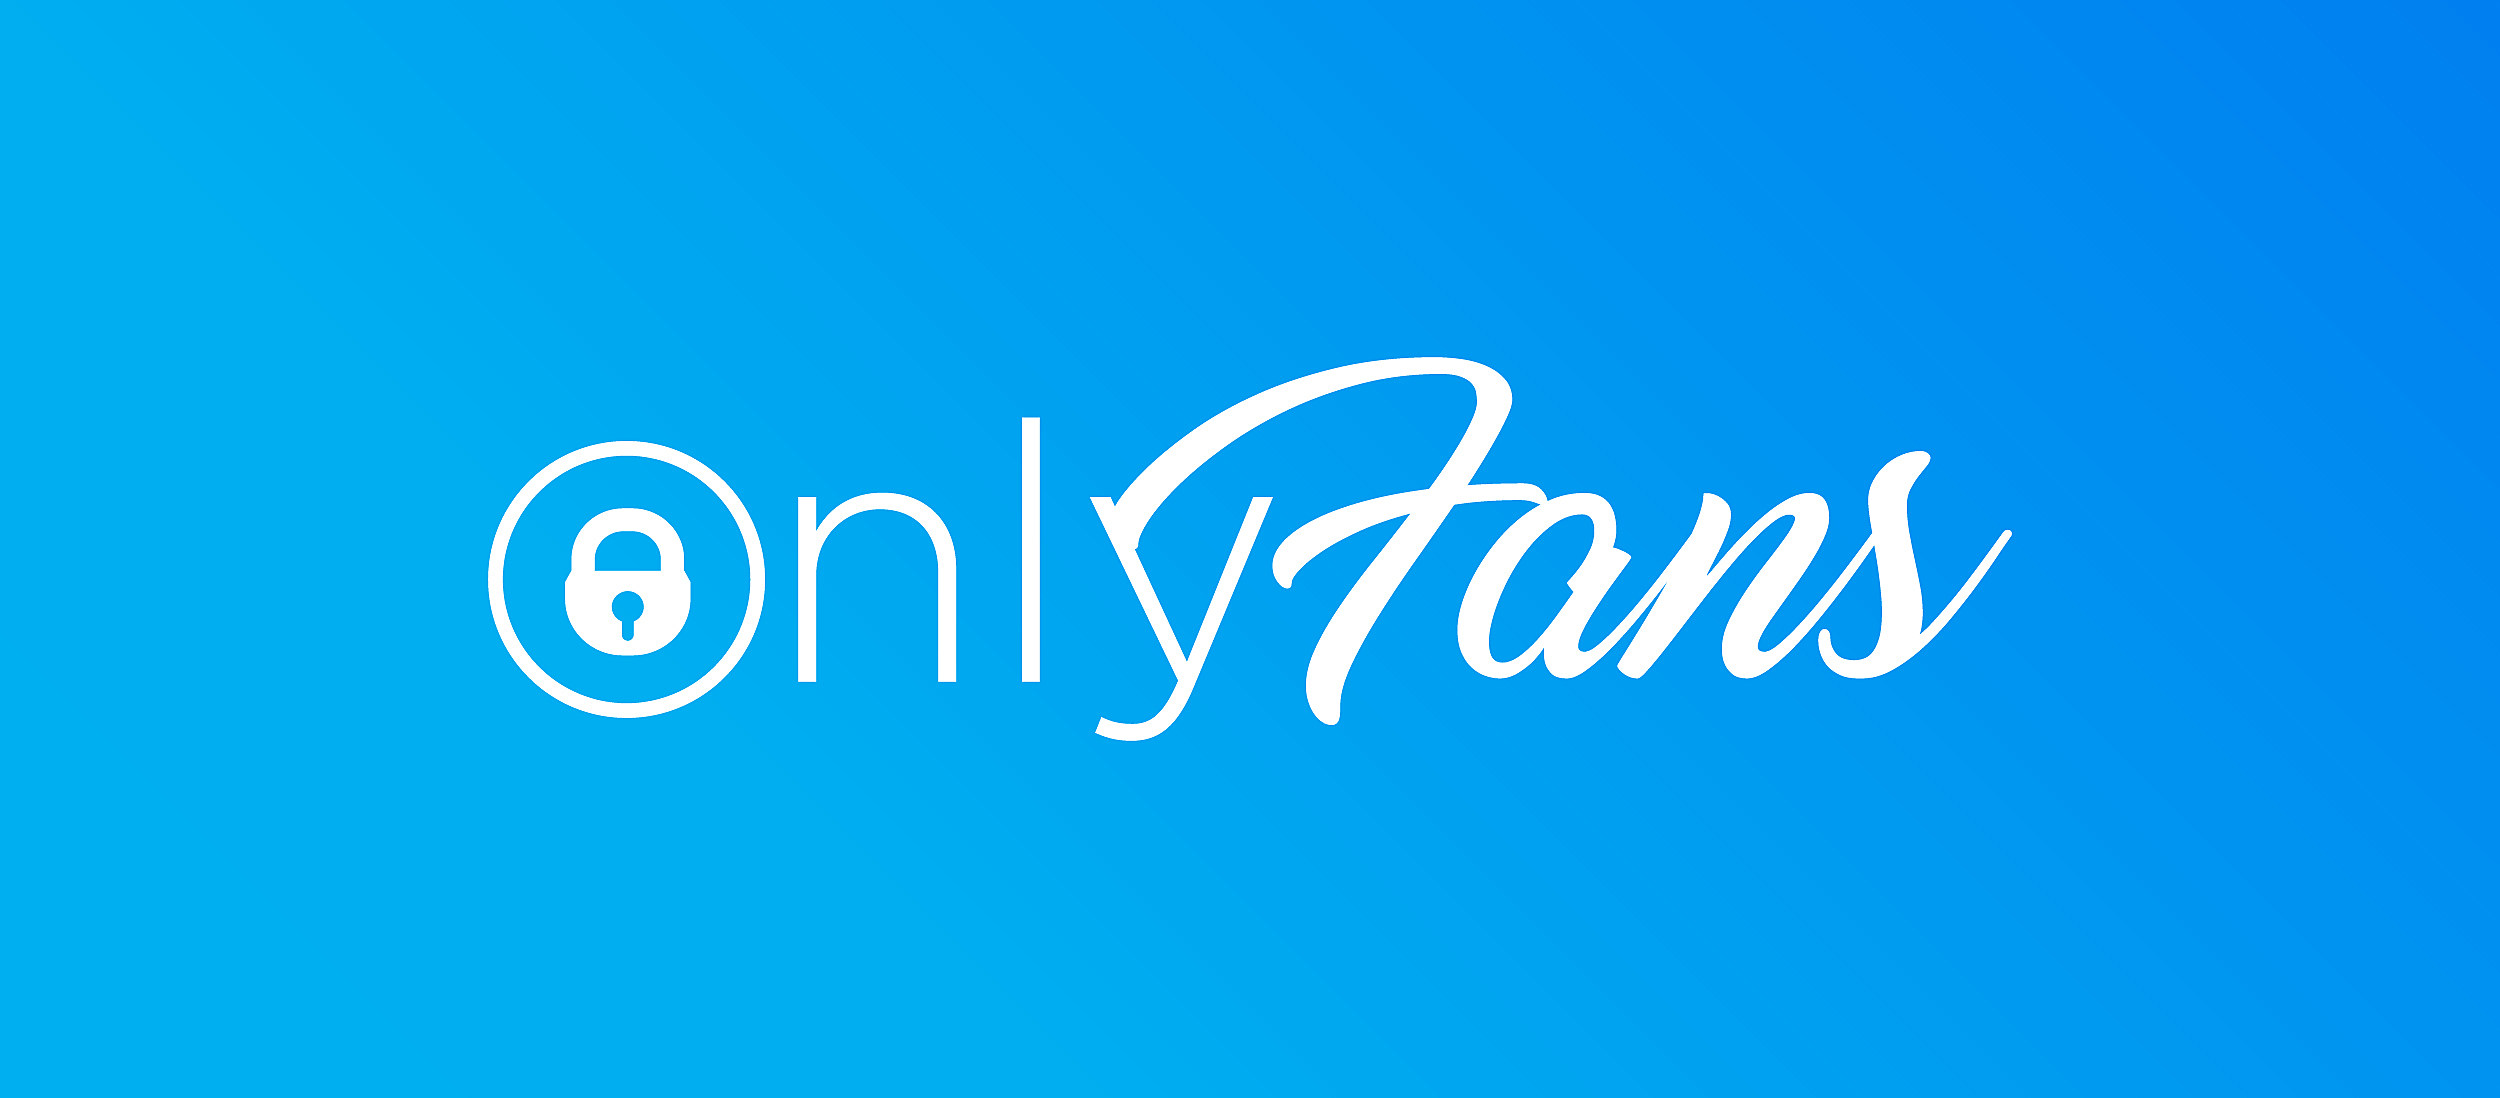 OnlyFans To Ban Sexually Explicit Content Starting In October